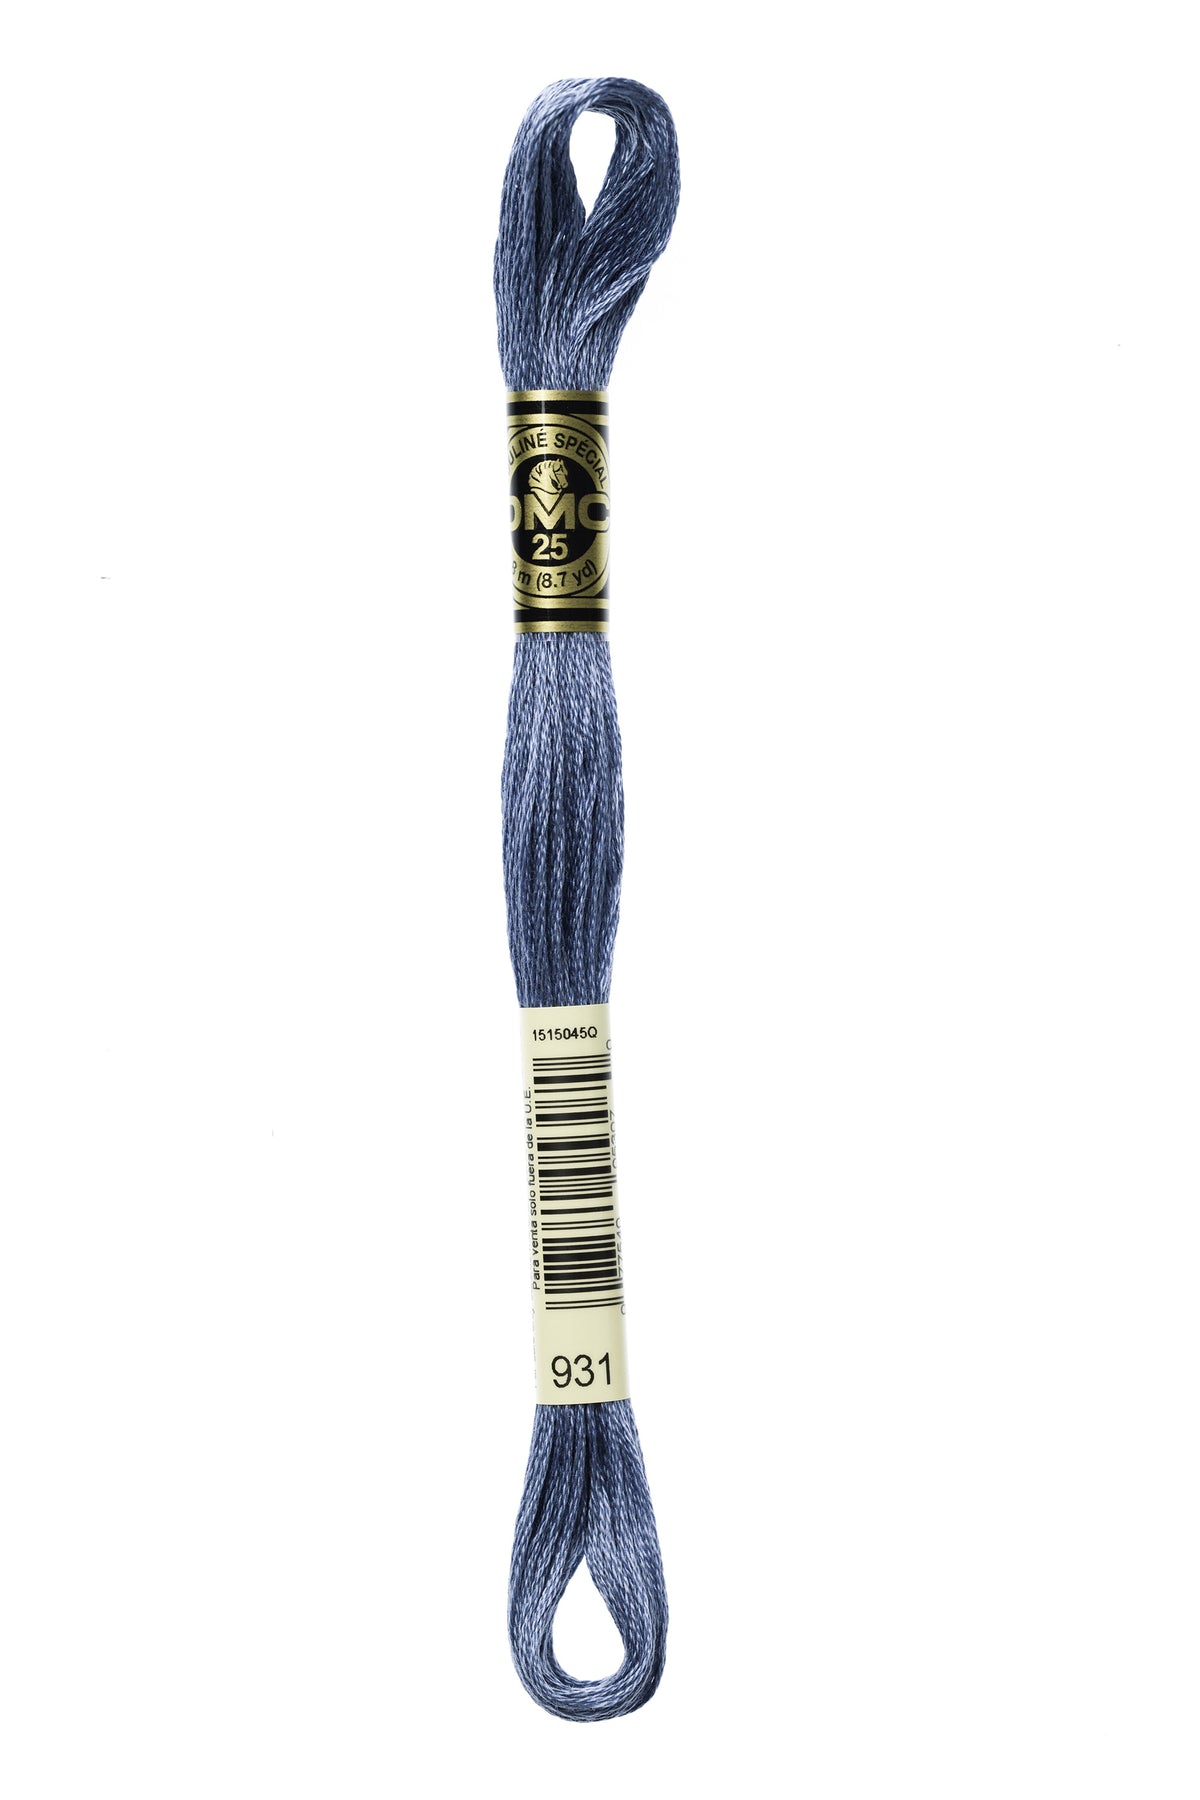 Cotton Six Stranded Embroidery Floss | DMC 917-3688